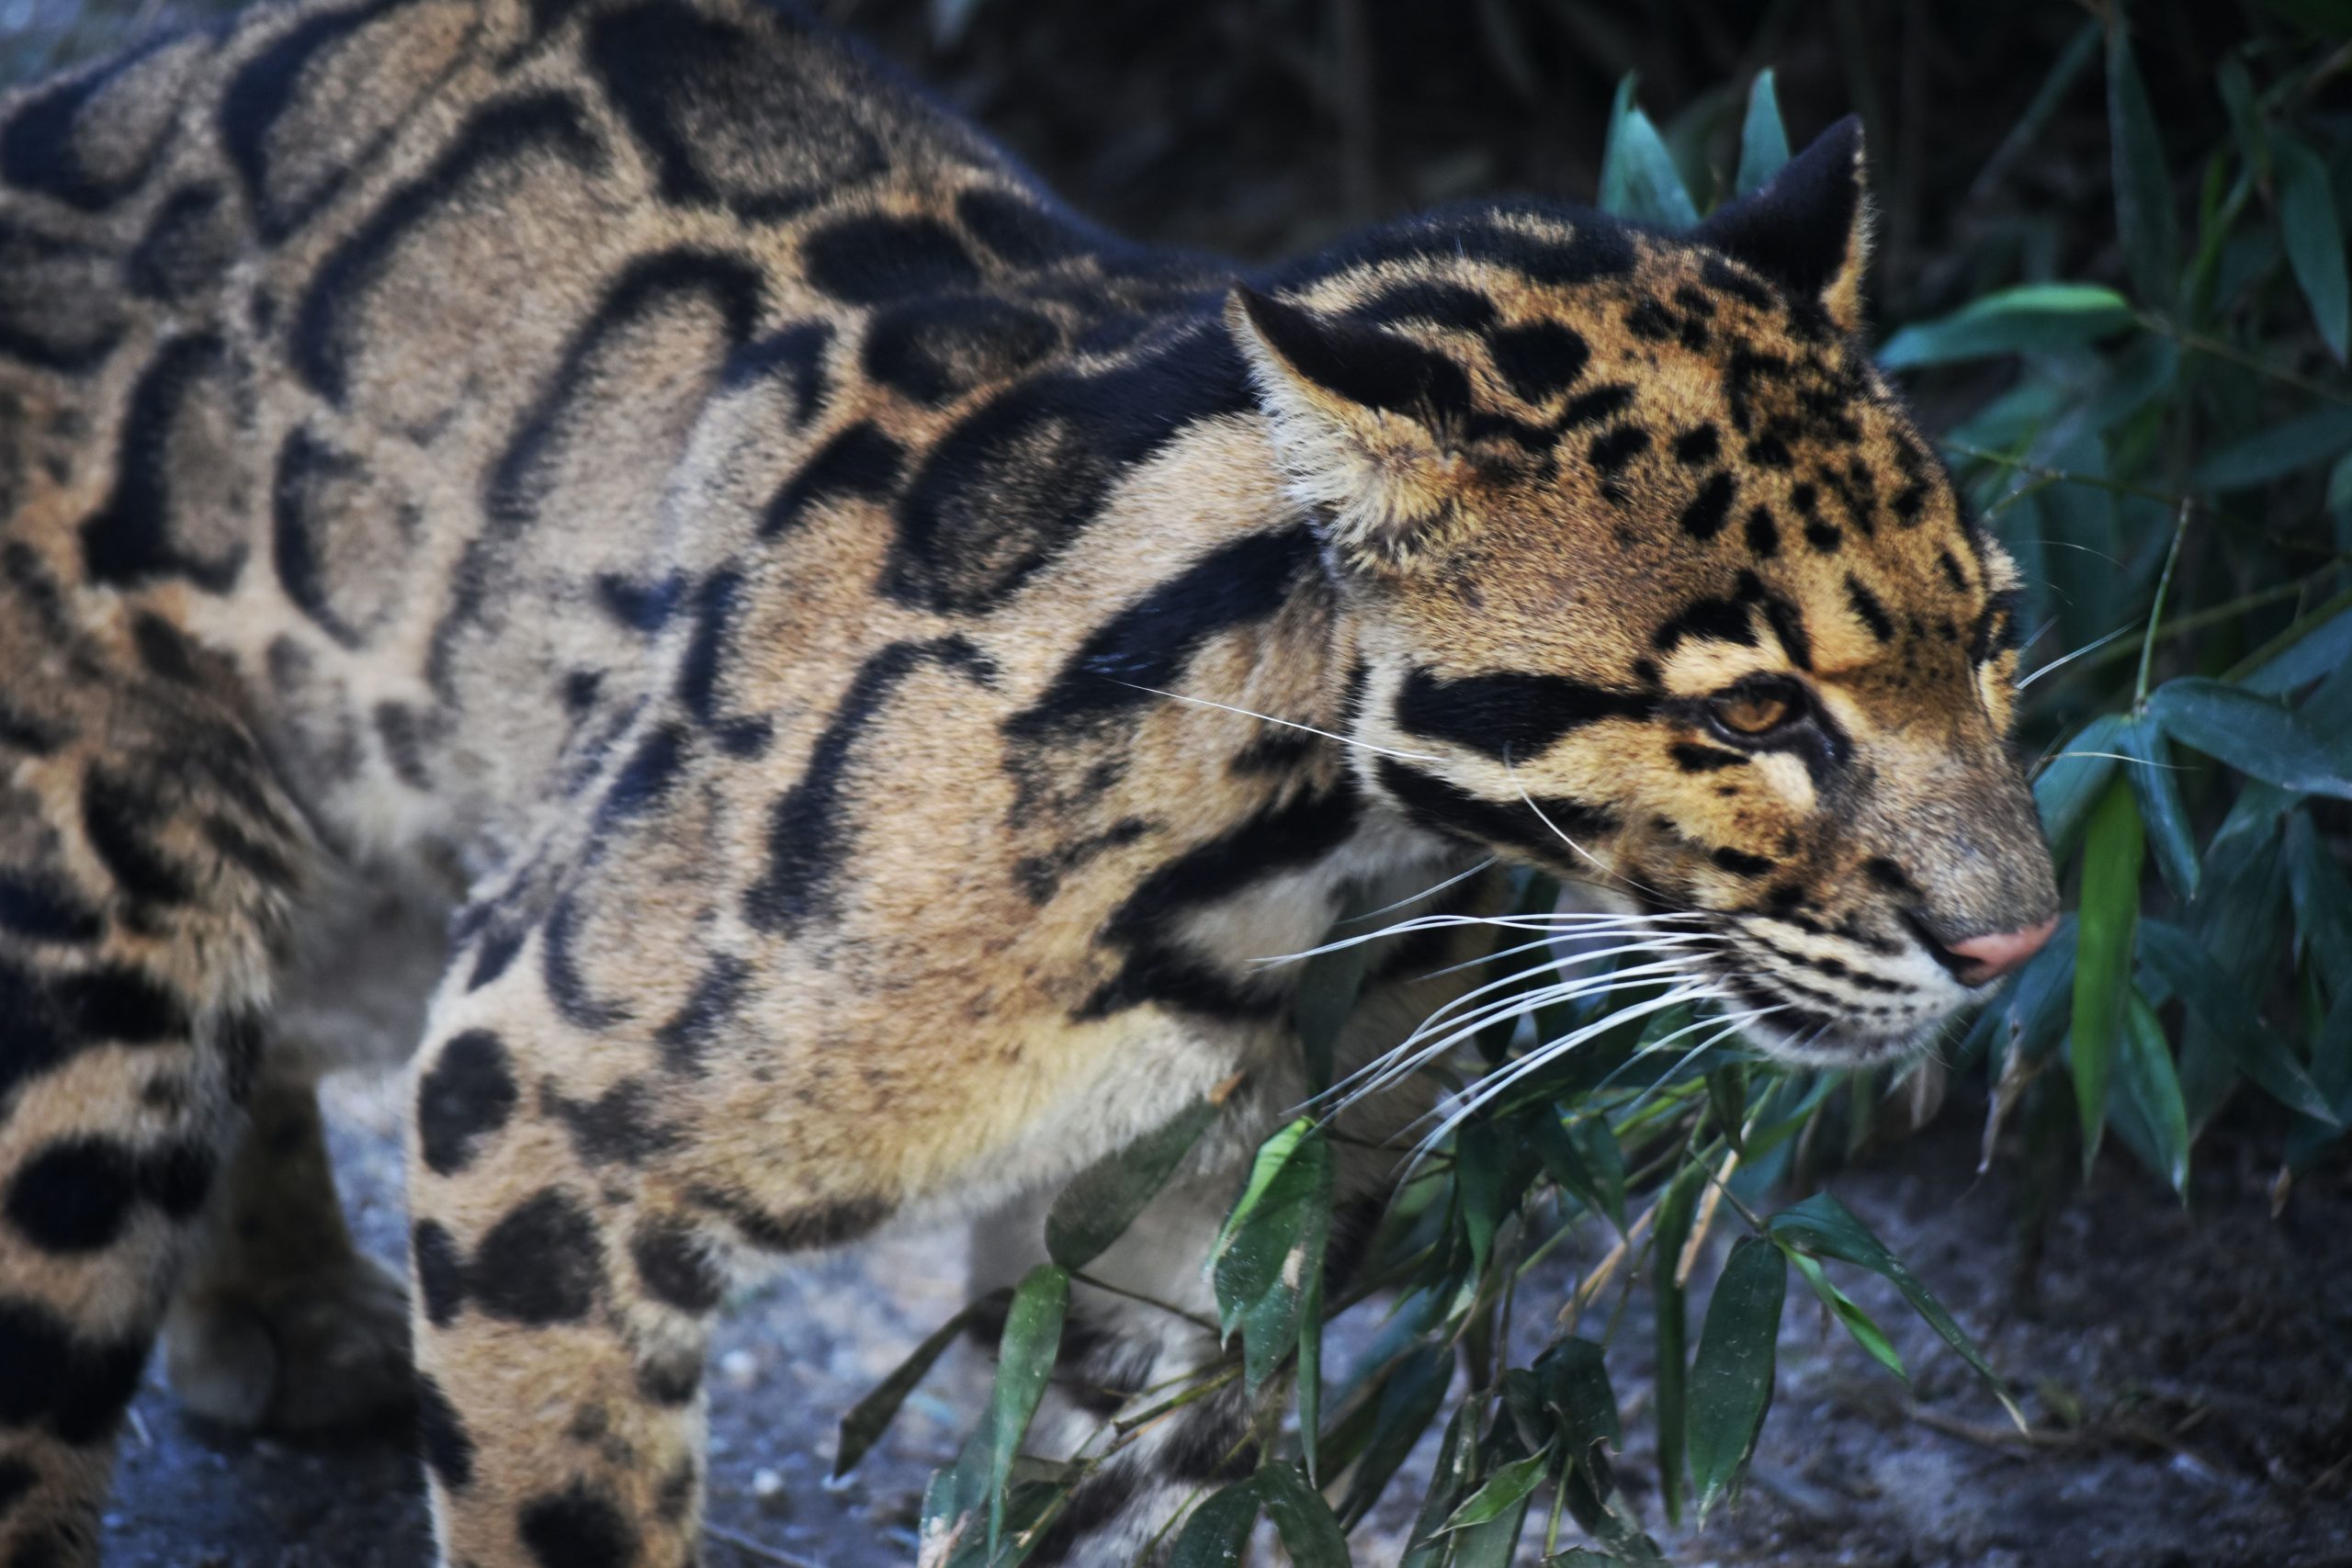 Dallas Zoo closed: Search on for escaped clouded leopard